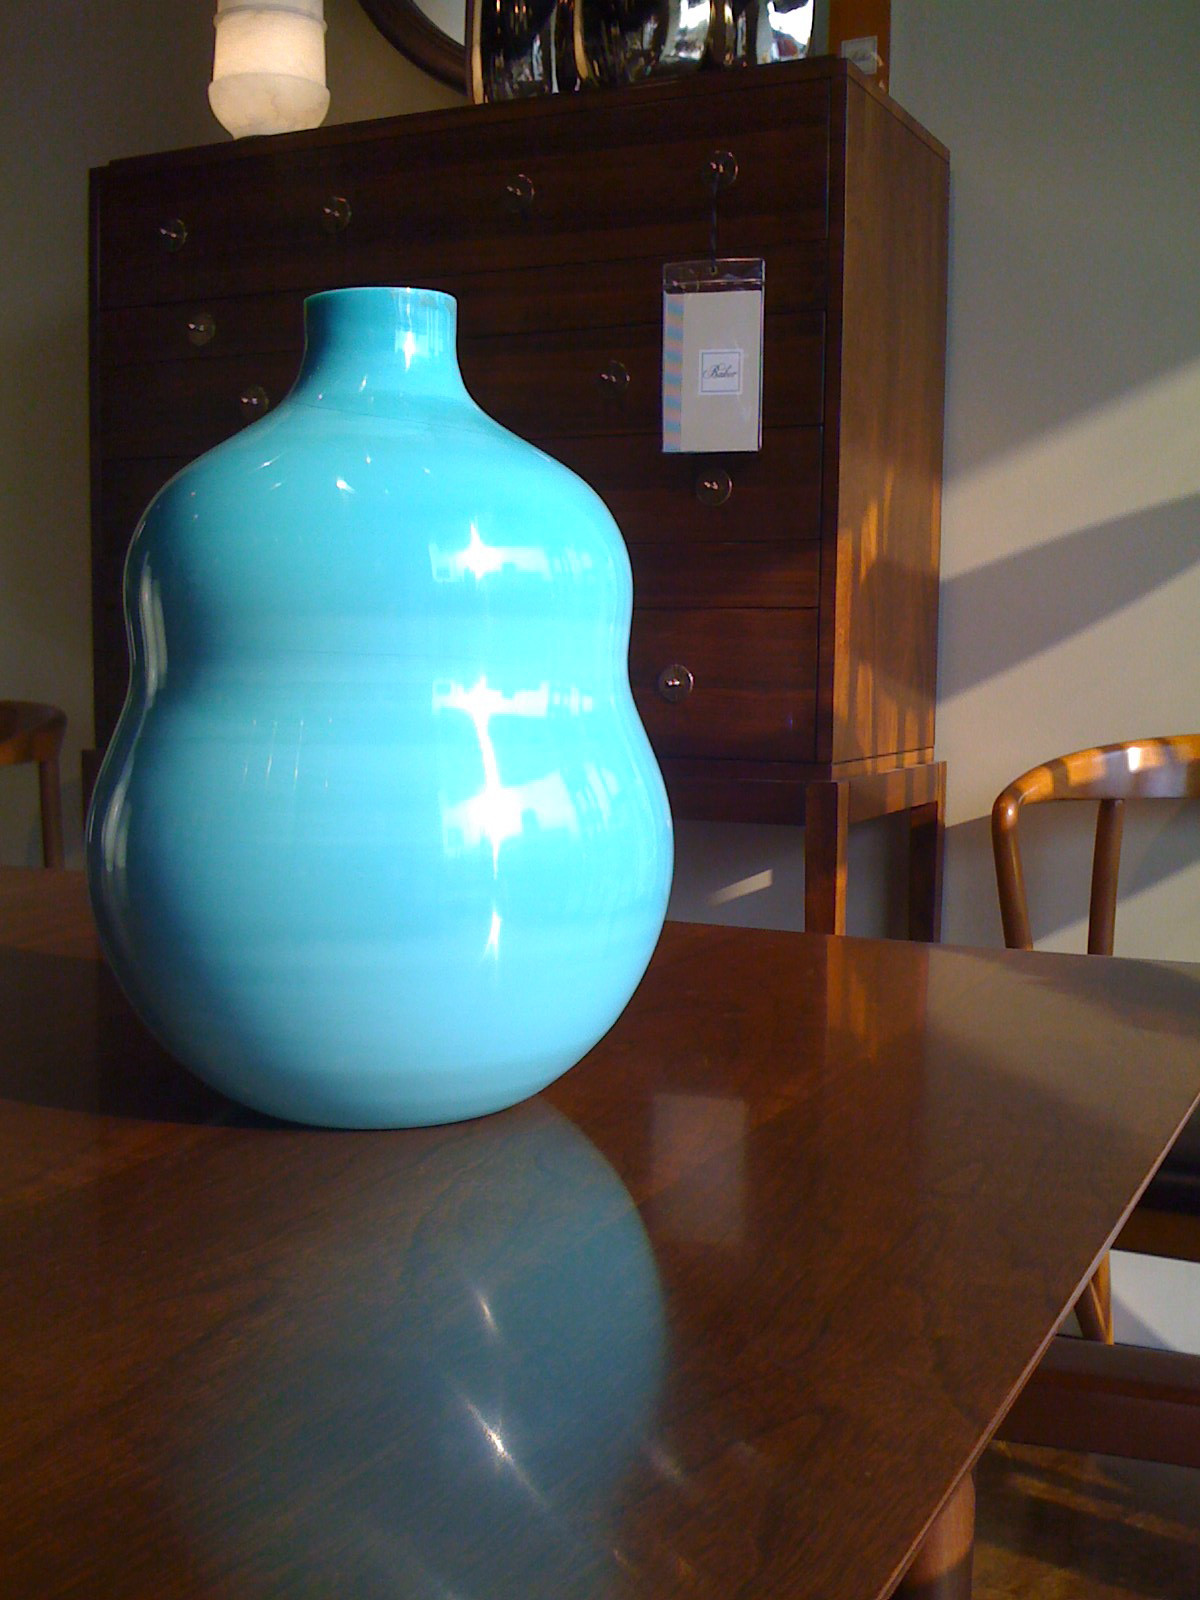 peking glass vase for sale of purchase worthy peking glass vase by robert kuo for peking glass vase by robert kuo